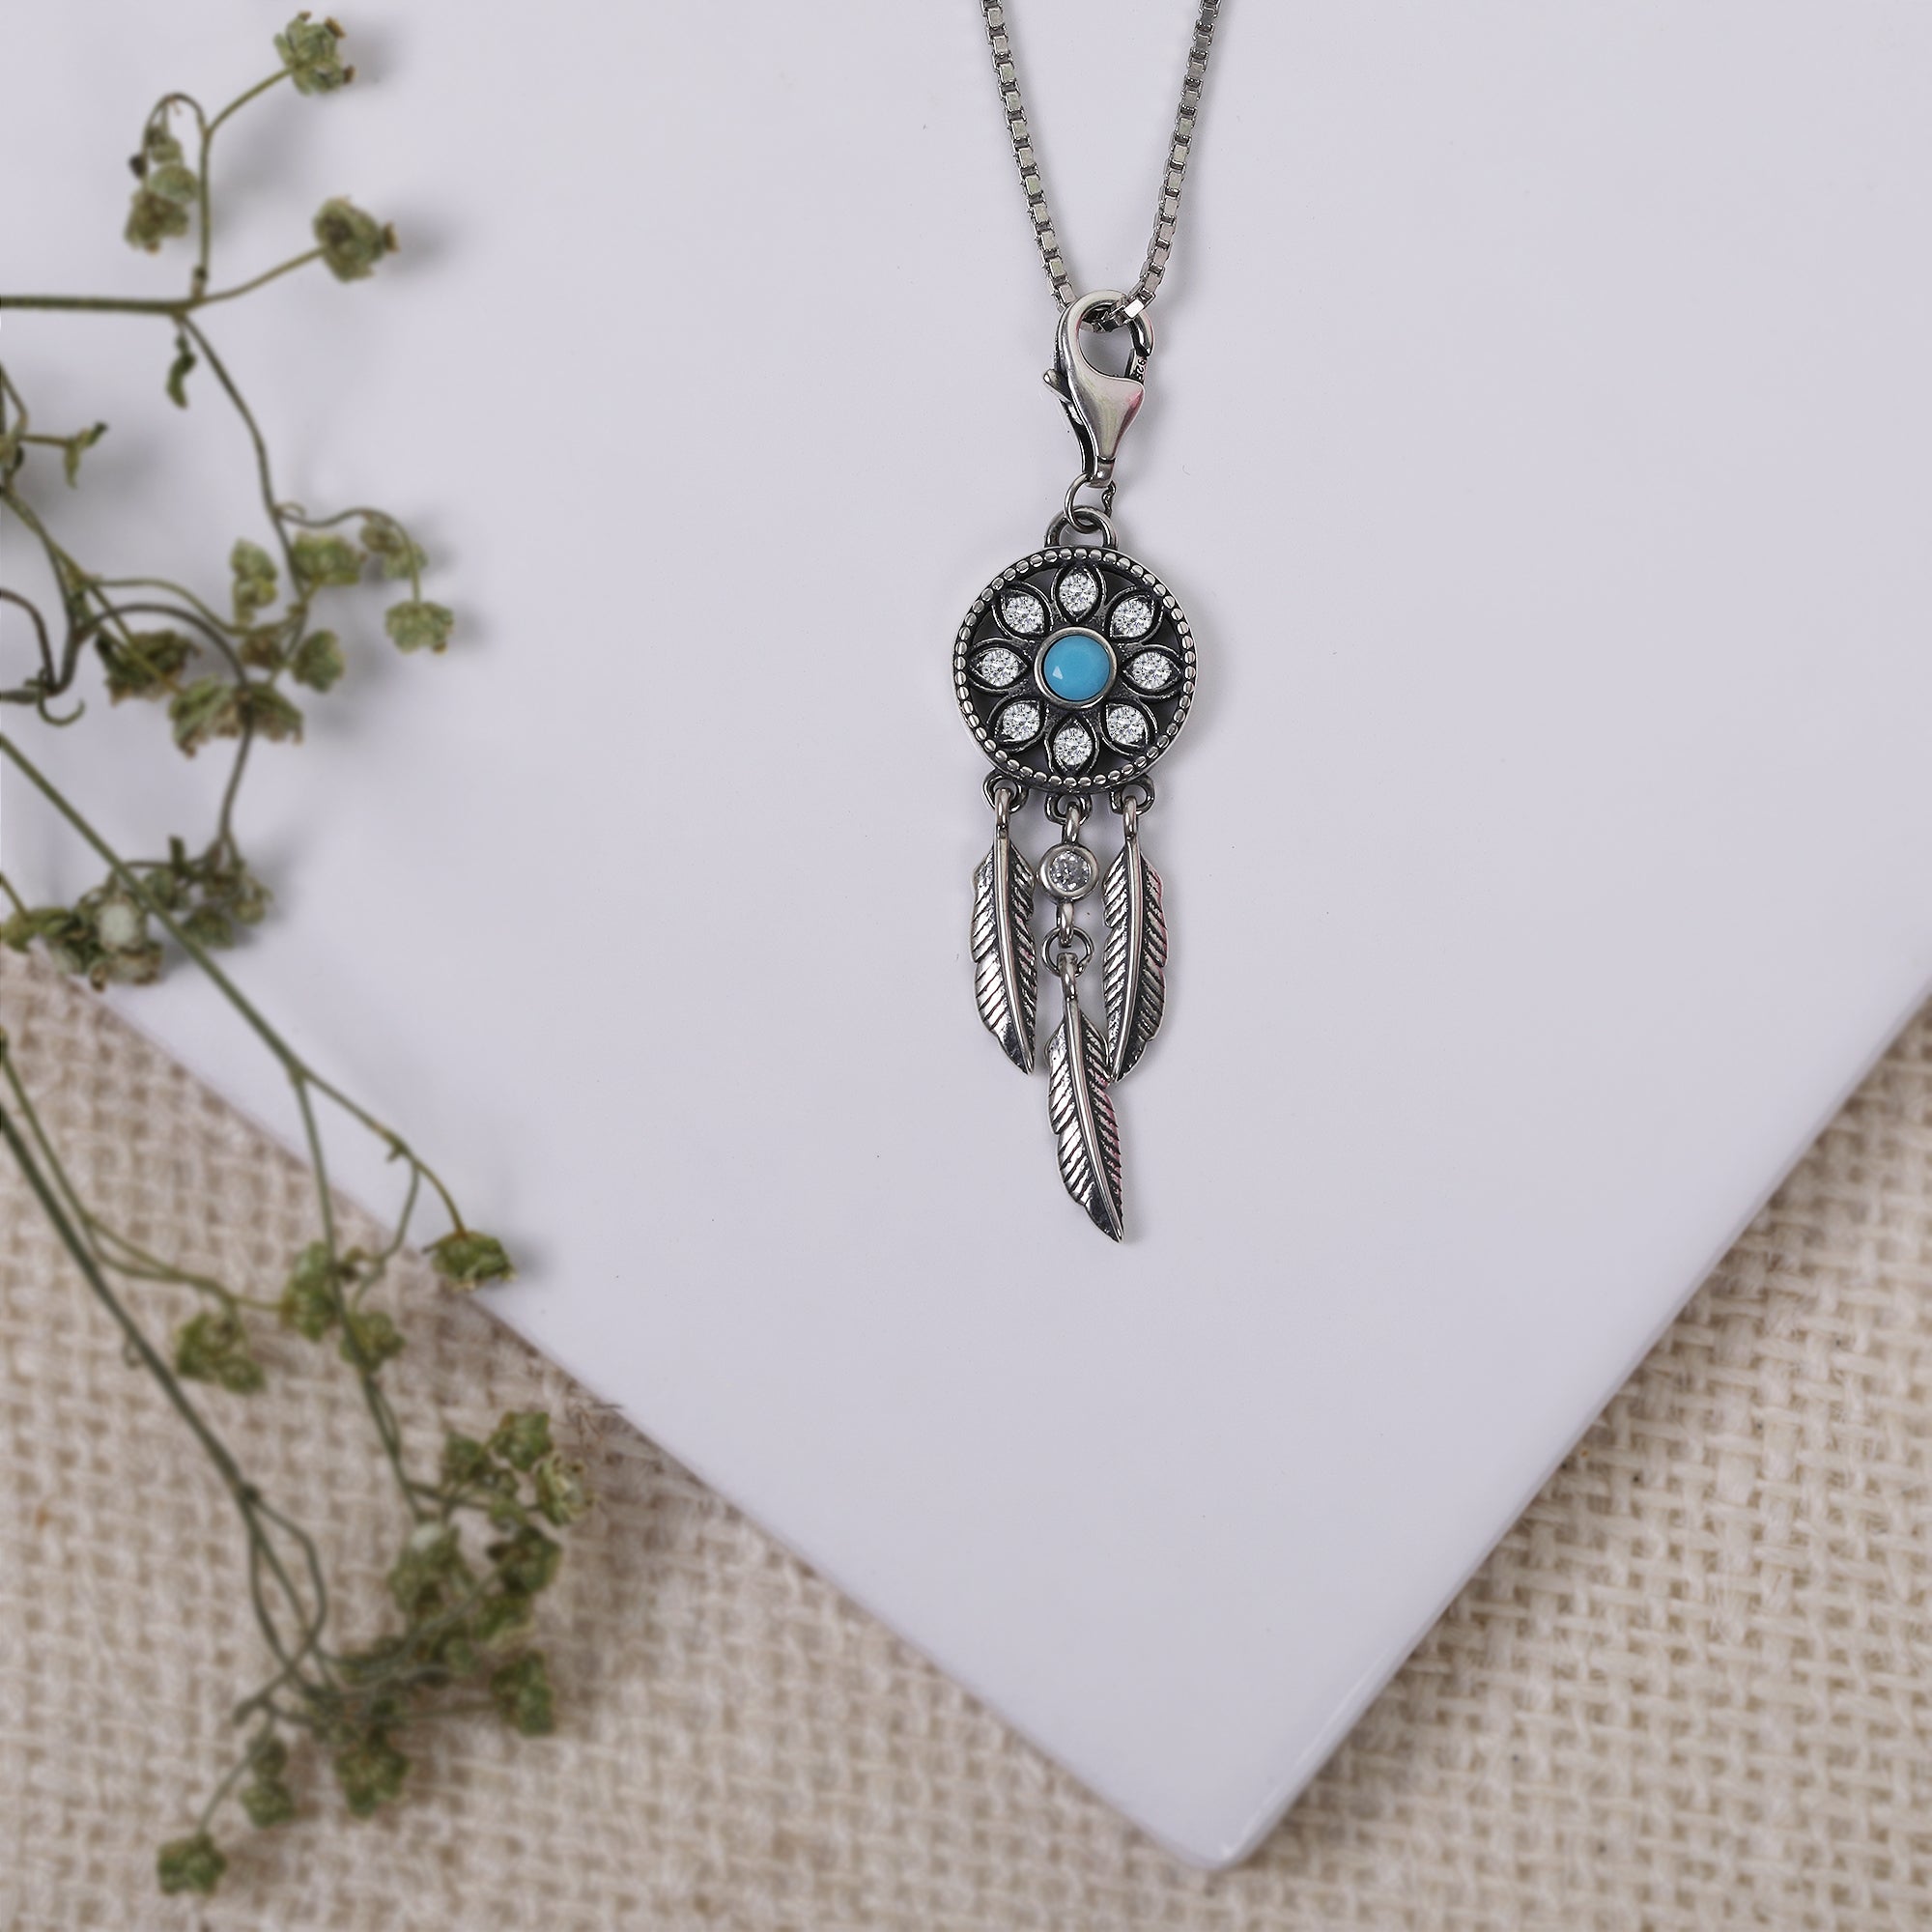 Dreamcatcher necklace dream catcher necklace Indian jewelry tribal necklace  wiccan jewelry